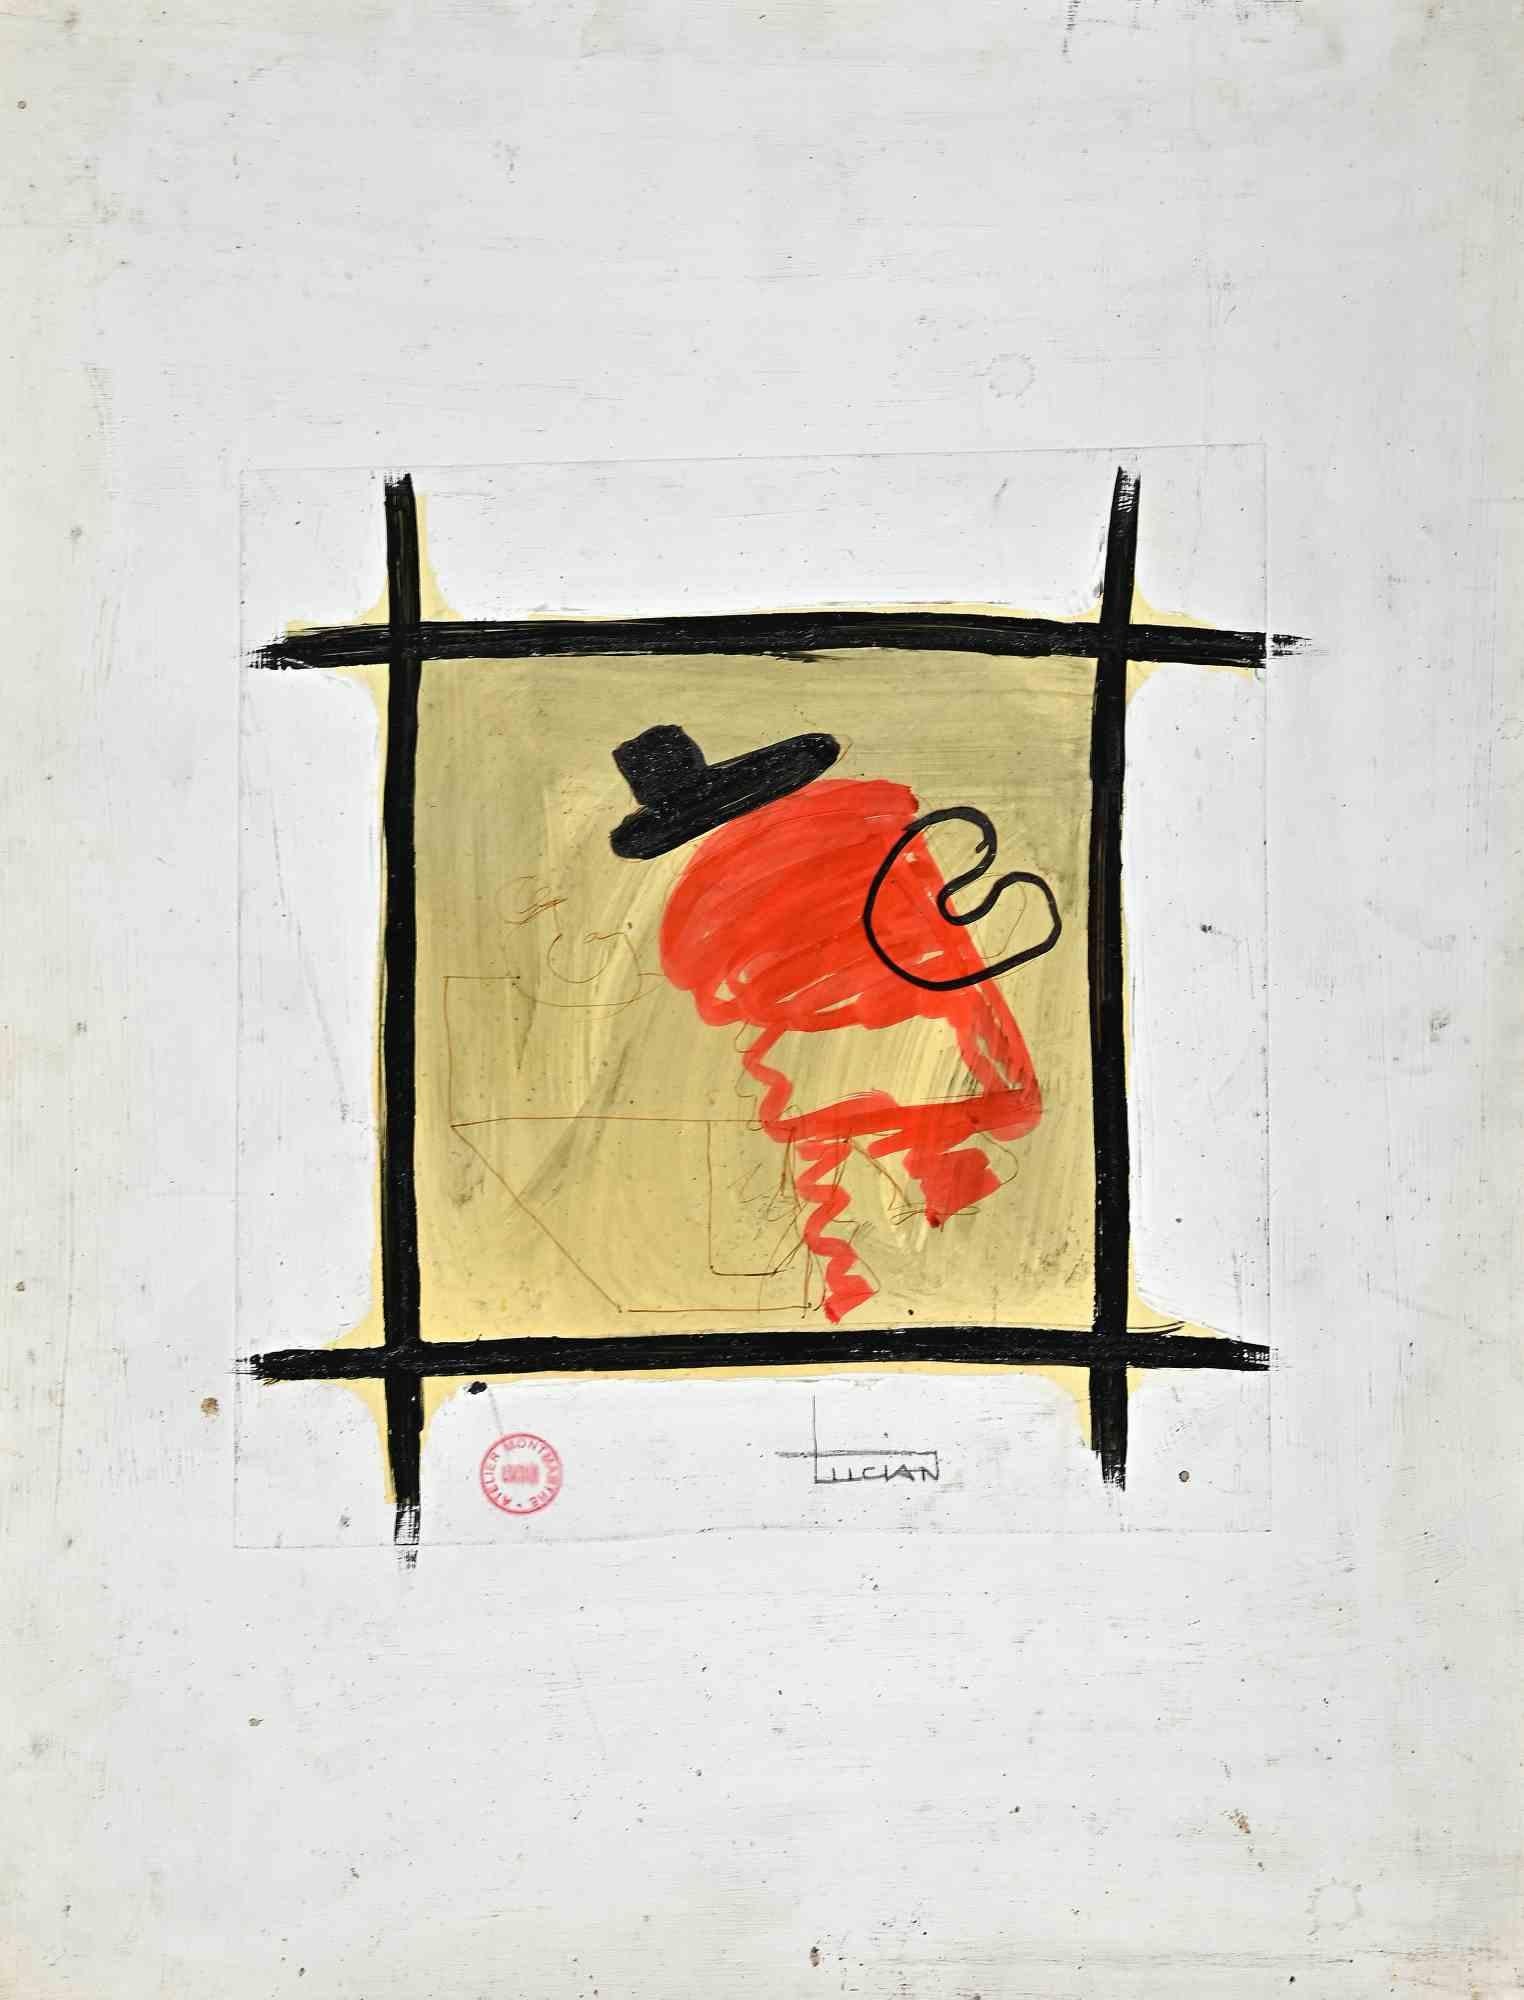 Abstract Composition is an Original tempera and watercolor on Paper applied on wood realized by Lucian in the 20th century.

Hand-signed , also the stamp of Atelier Montmartre.
